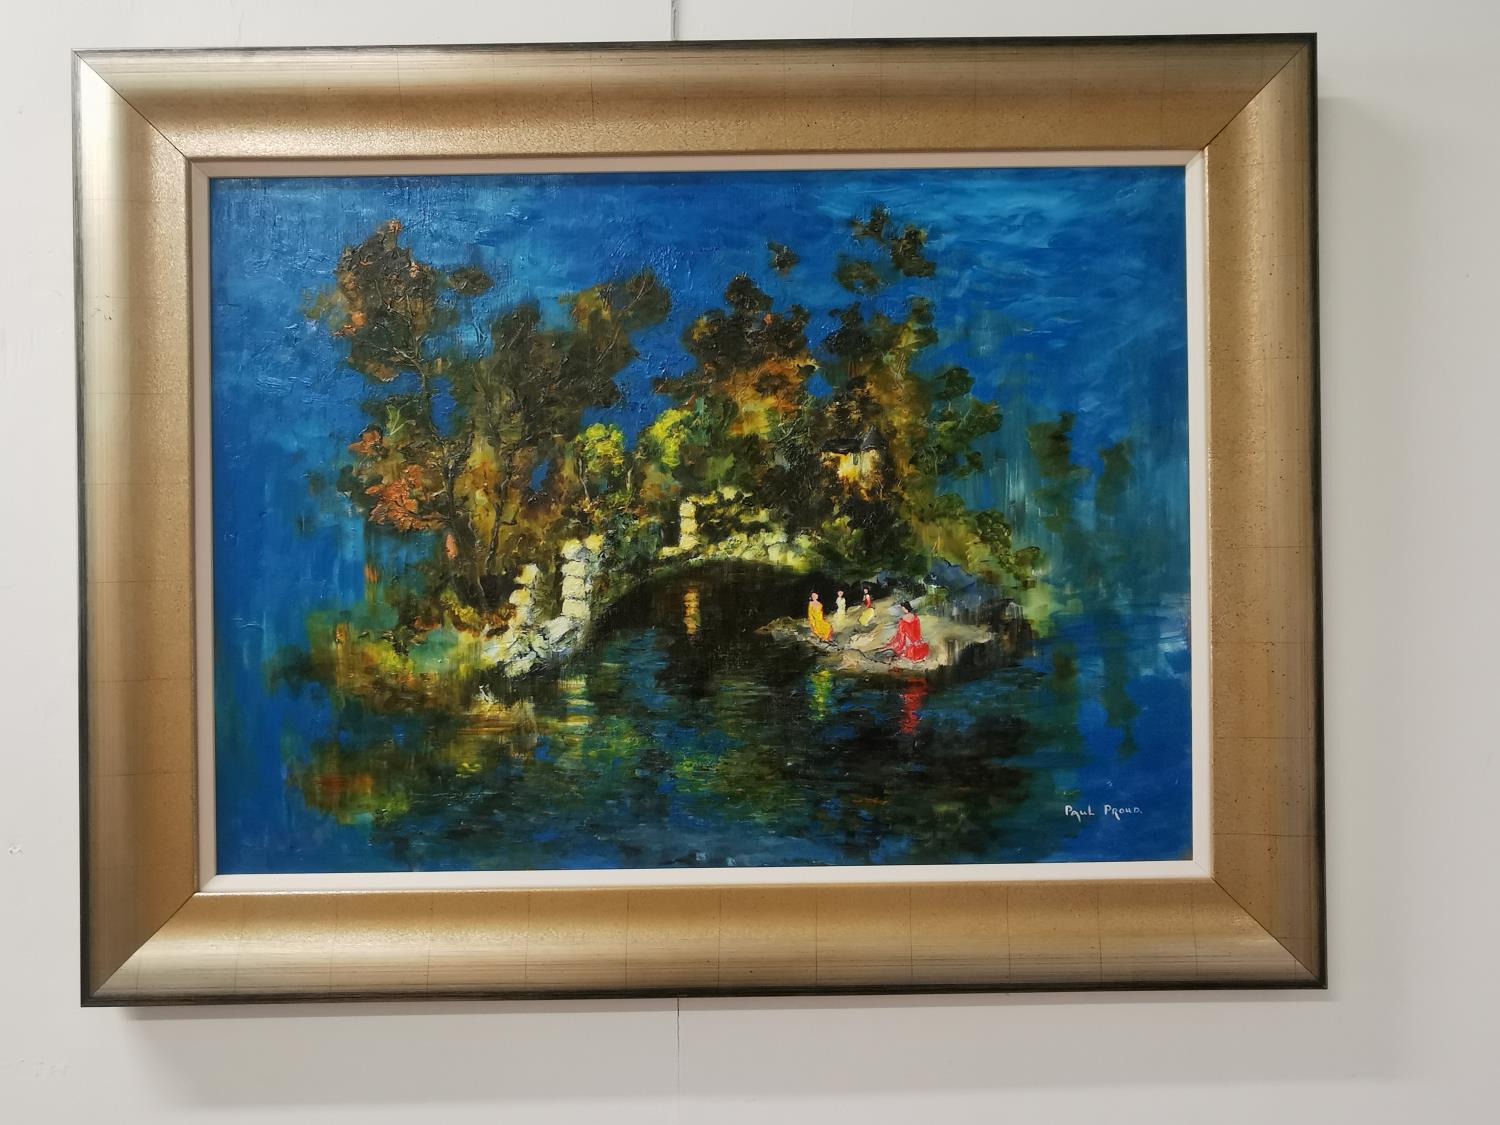 Paul Proud - Oil on Board - Untitled Woodland and Lake Scene